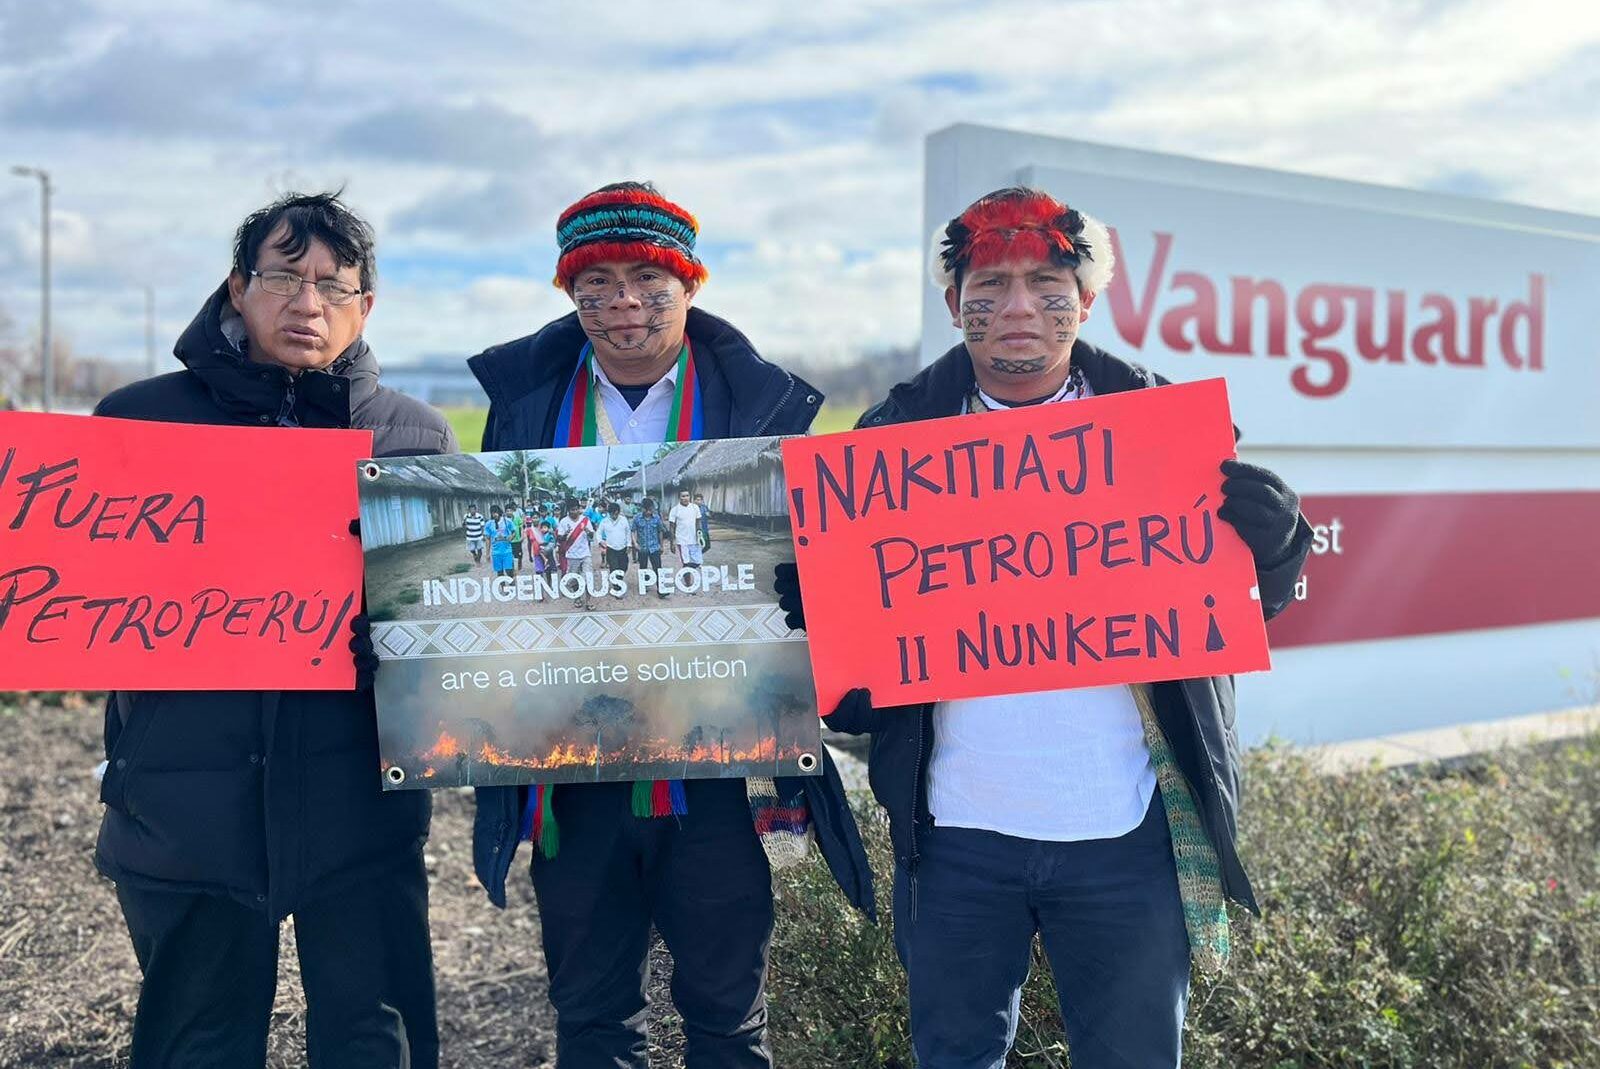 Three people stand at the entrance to Vanguard with signs in English, Spanish, and Wampis. The sign in English says, "indigenous people are a climate solution."